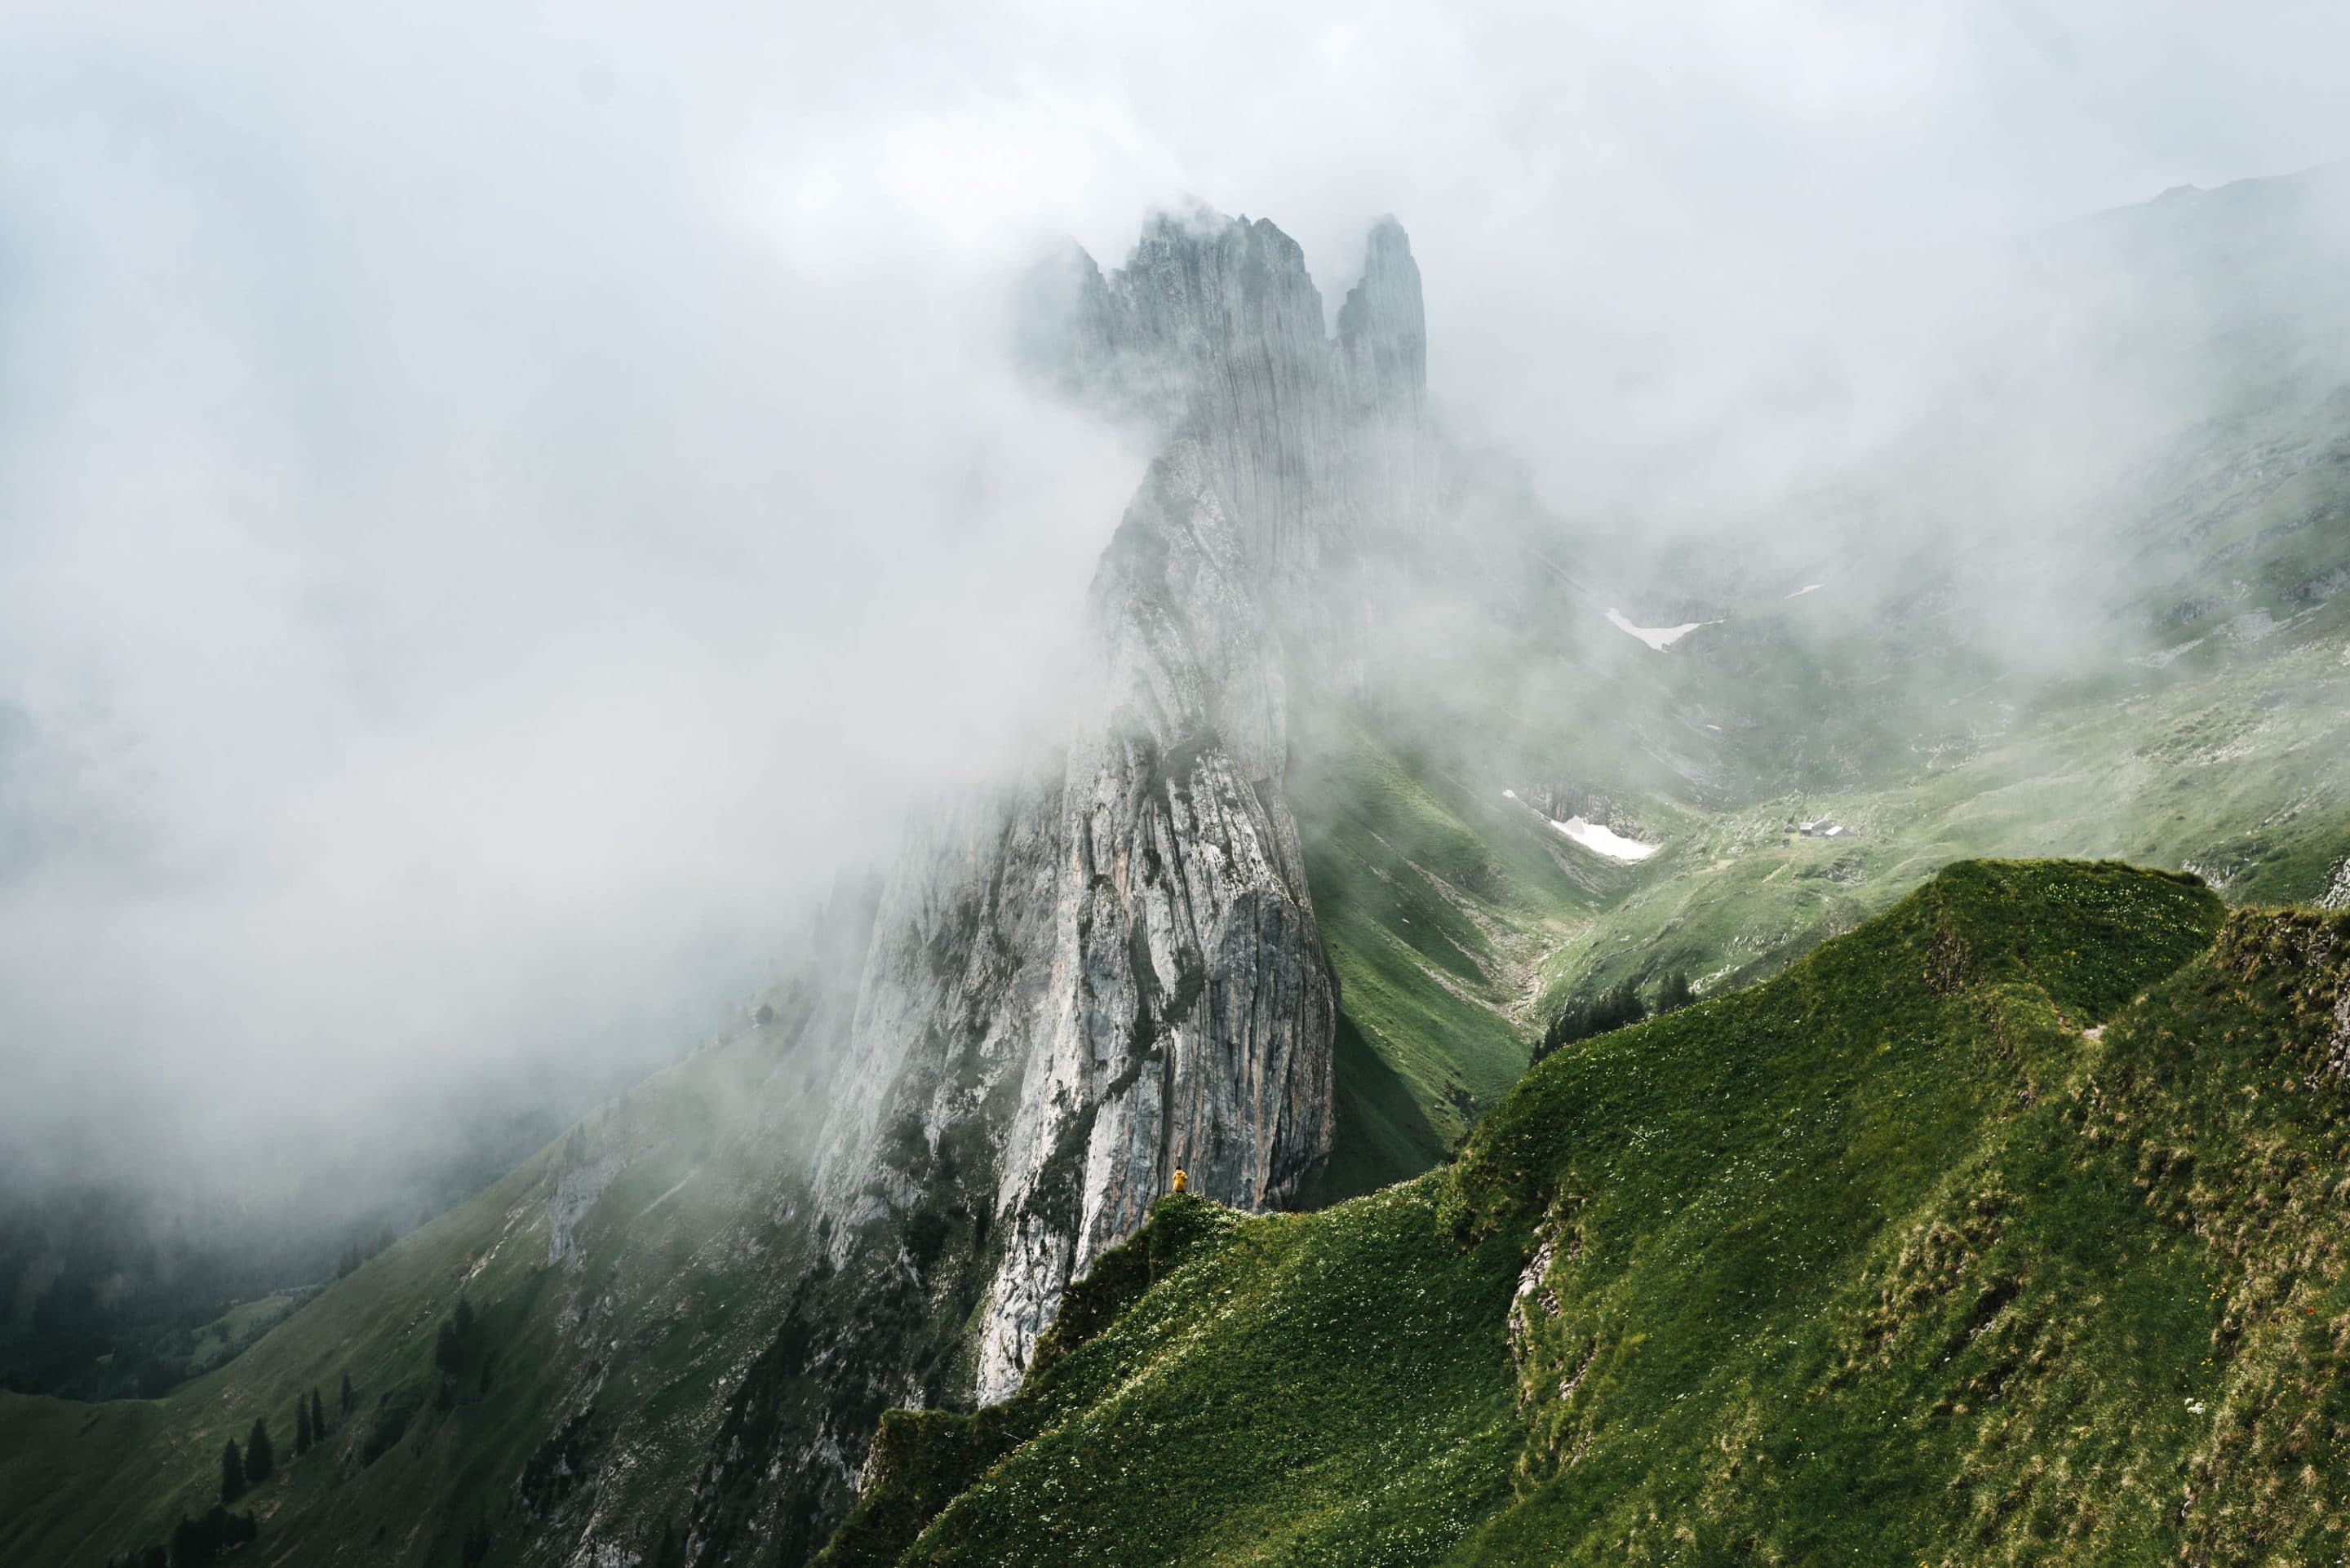 Minimalist view over the Saxer Luecke in Appenzell, Switzerland as the thick fog covered the majestic mountains and left us with a moody and minimalist landscape by Michael Schauer